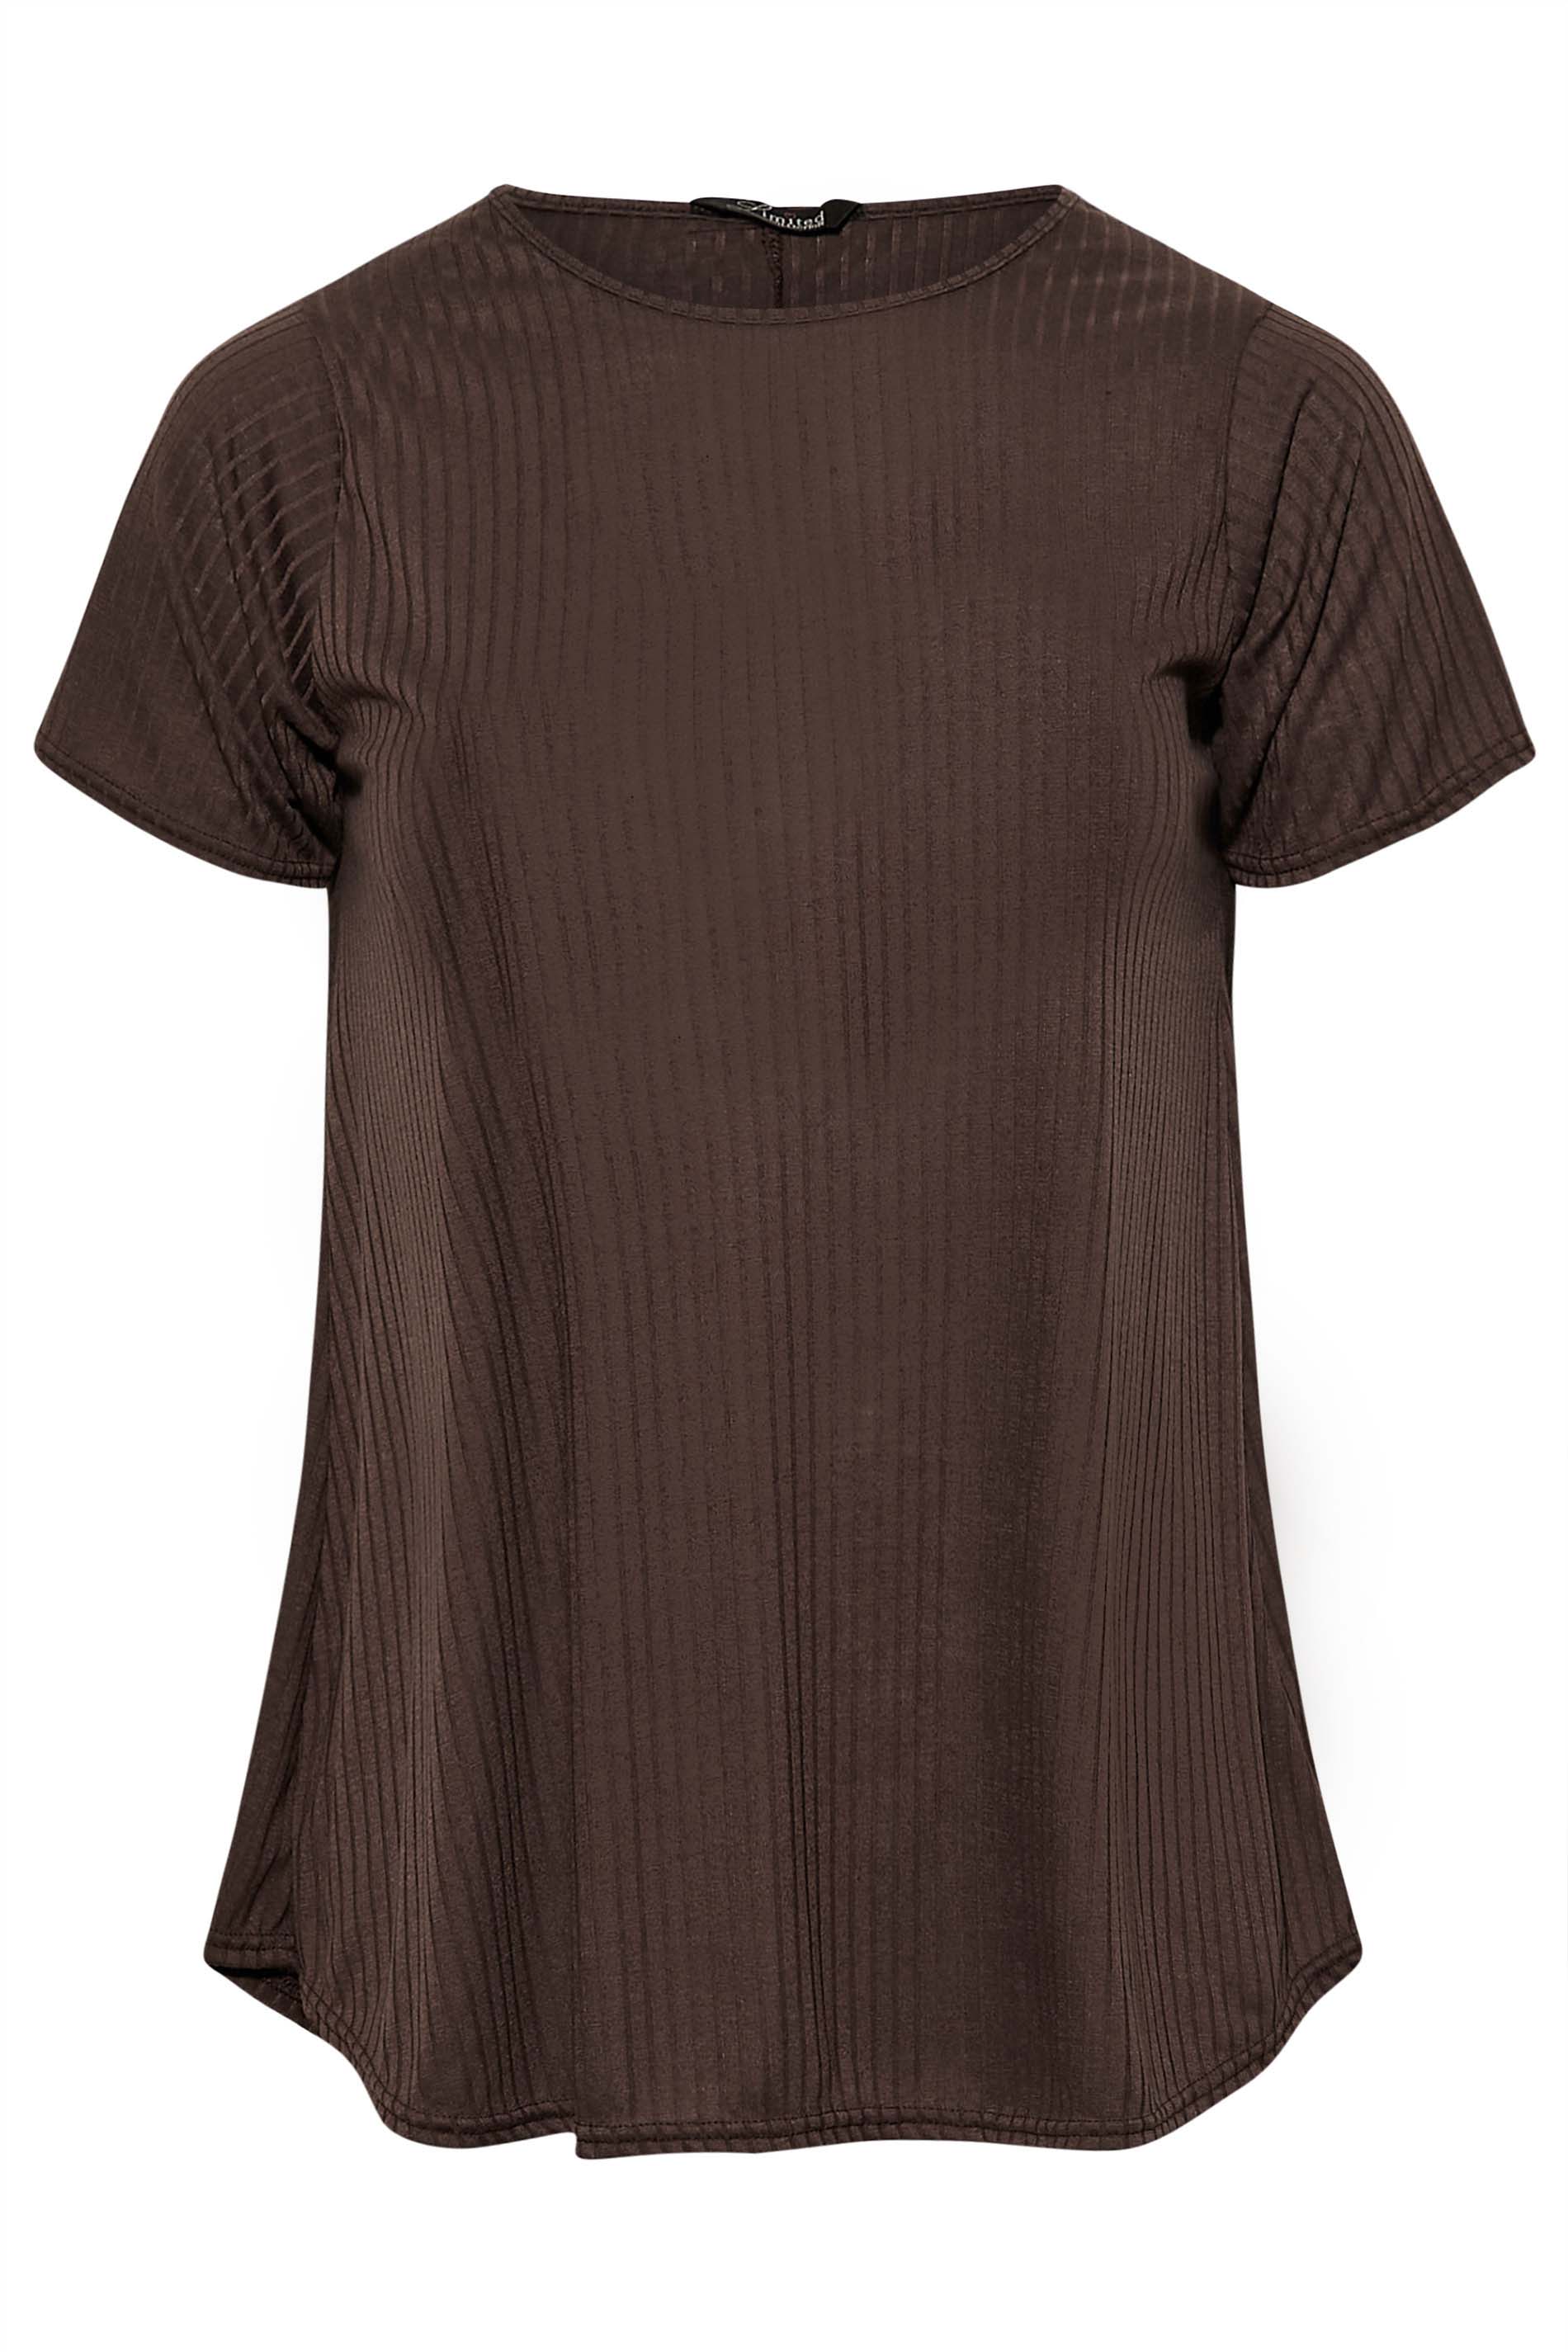 LIMITED COLLECTION Curve Chocolate Brown Ribbed Swing Top 1